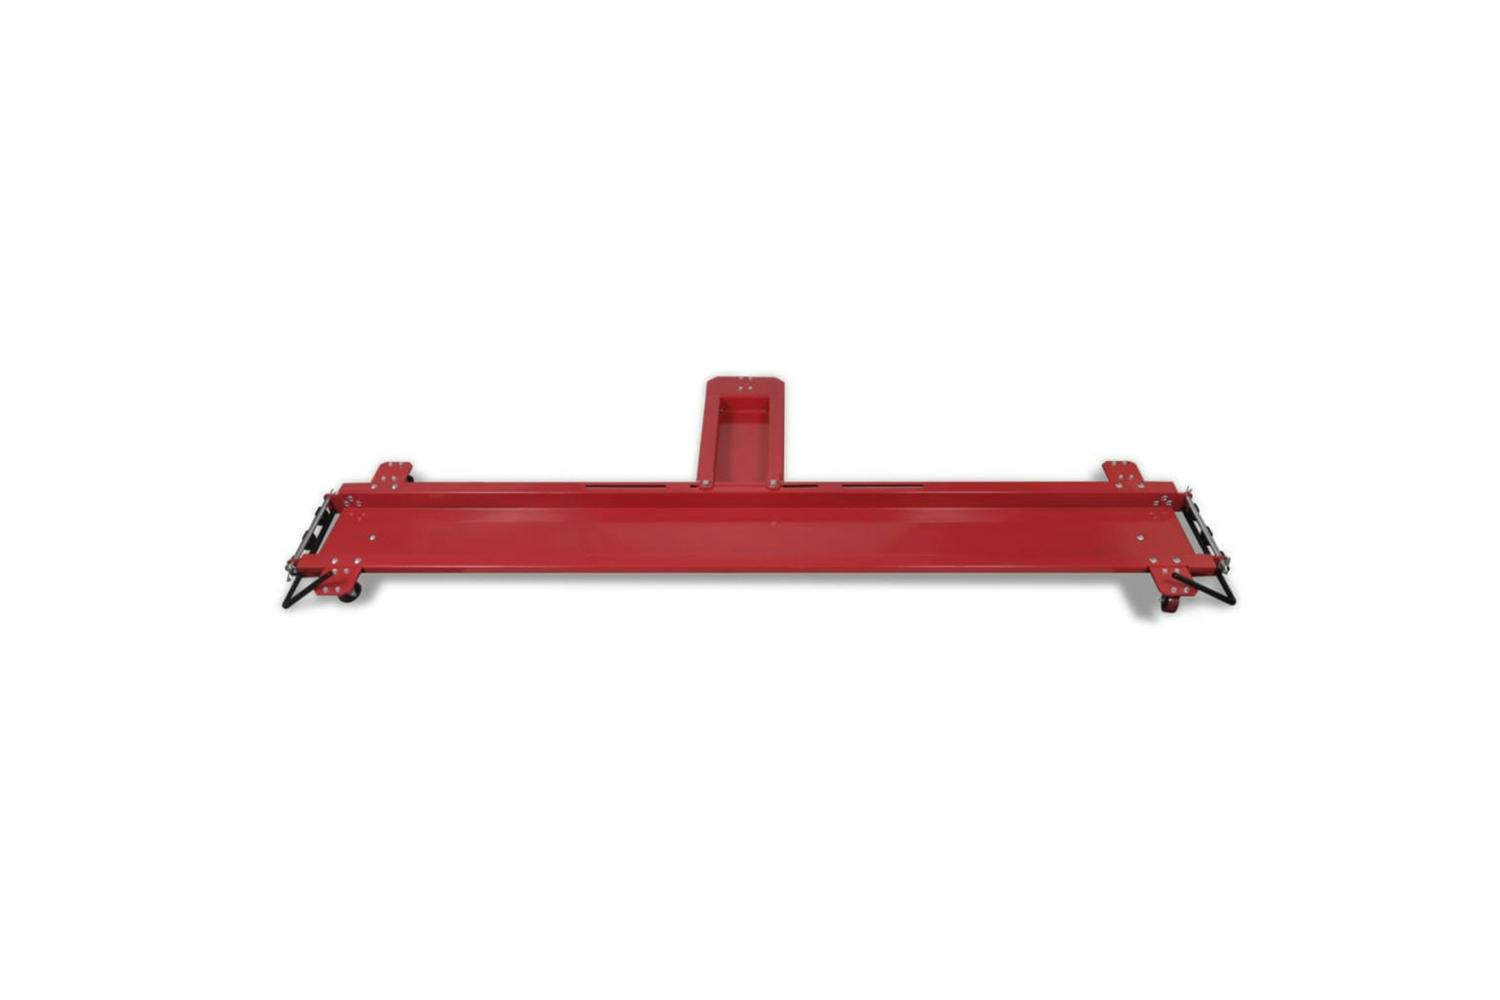 Vidaxl 210155 Motorcycle Dolly Red Motorcycle Stand